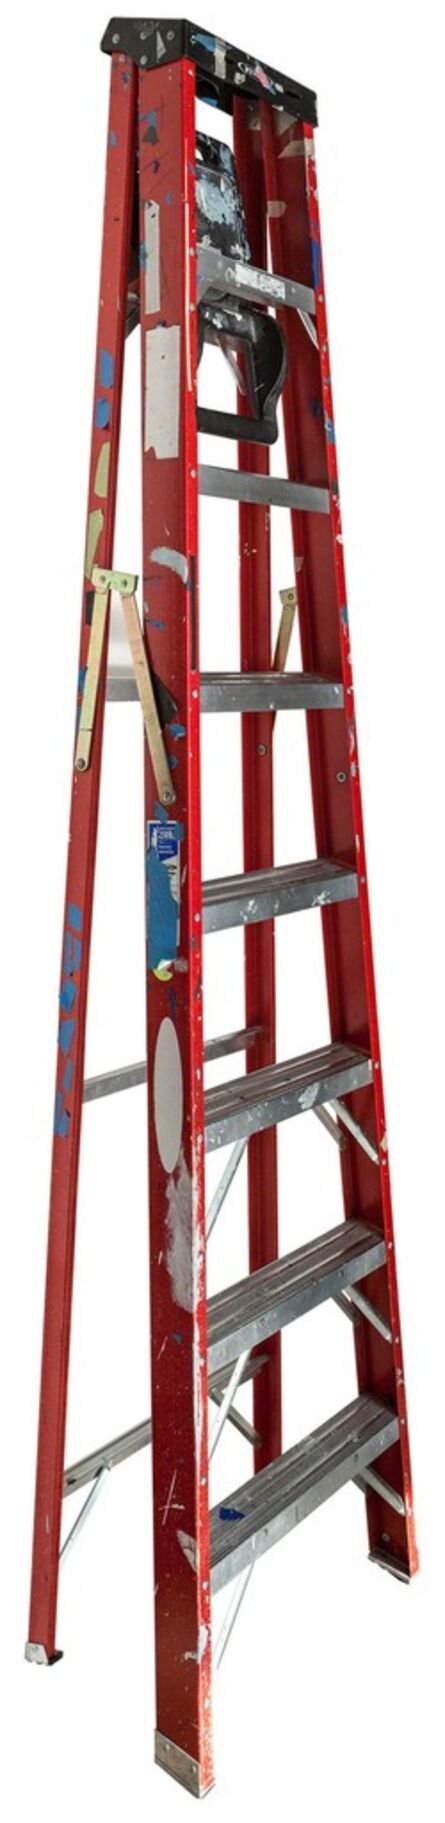 Jennifer Williams, ‘Large Folding Ladder: Red with Black Top and Tape’, 2014